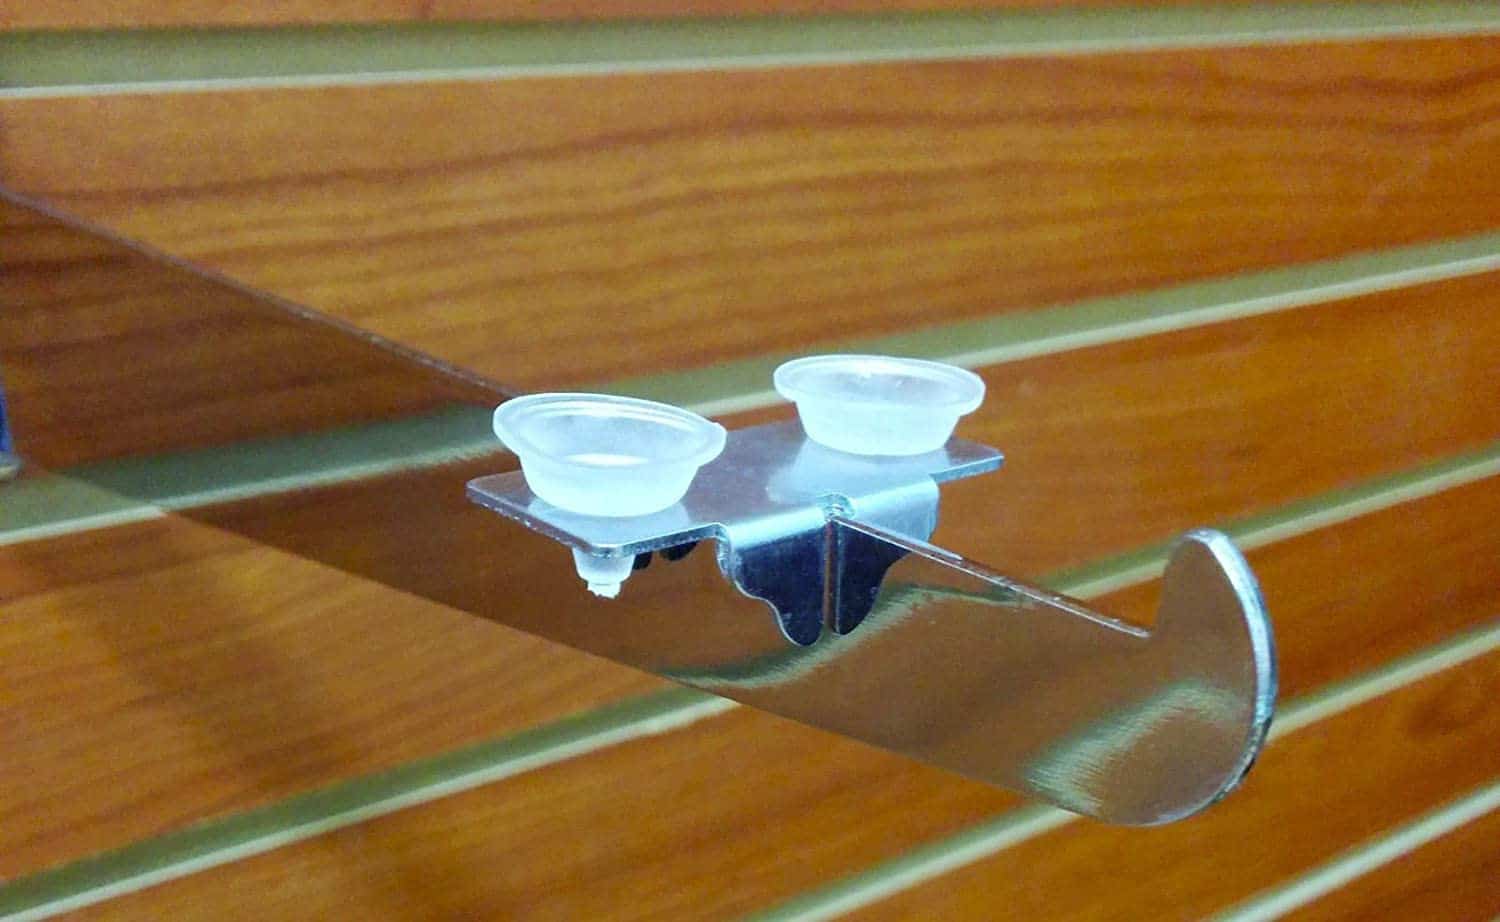 shelf bracket clips to hold adjustable wall mounted shelving in place